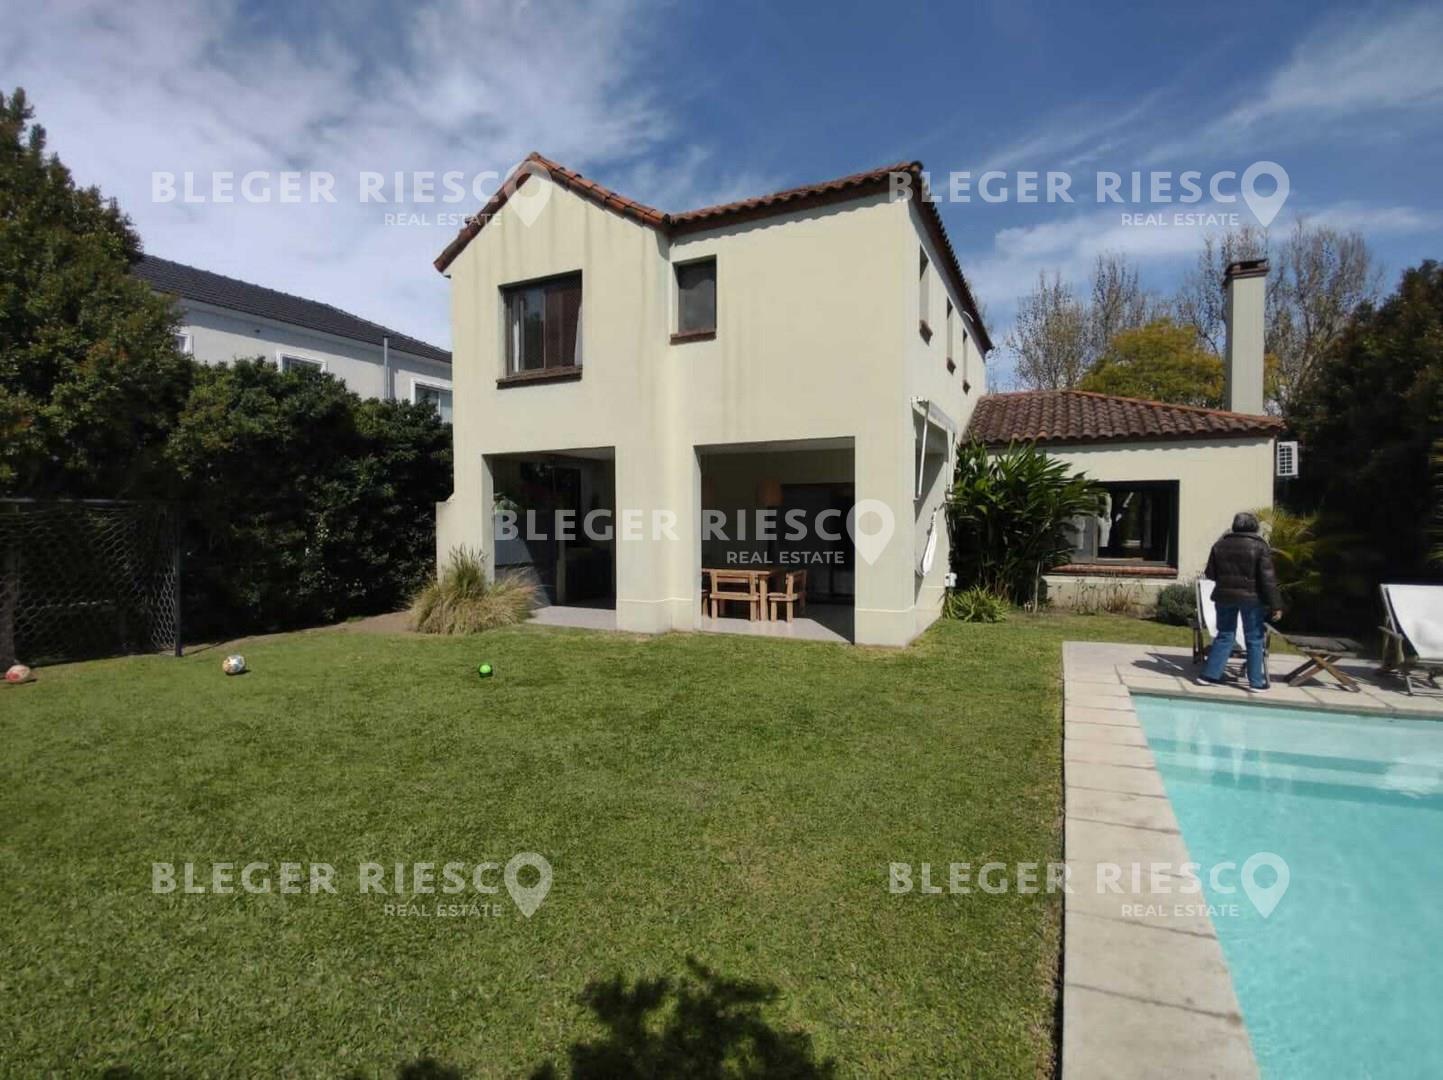 #4573143 | Alquiler | Casa | Greenlands (Bleger-Riesco Real State)